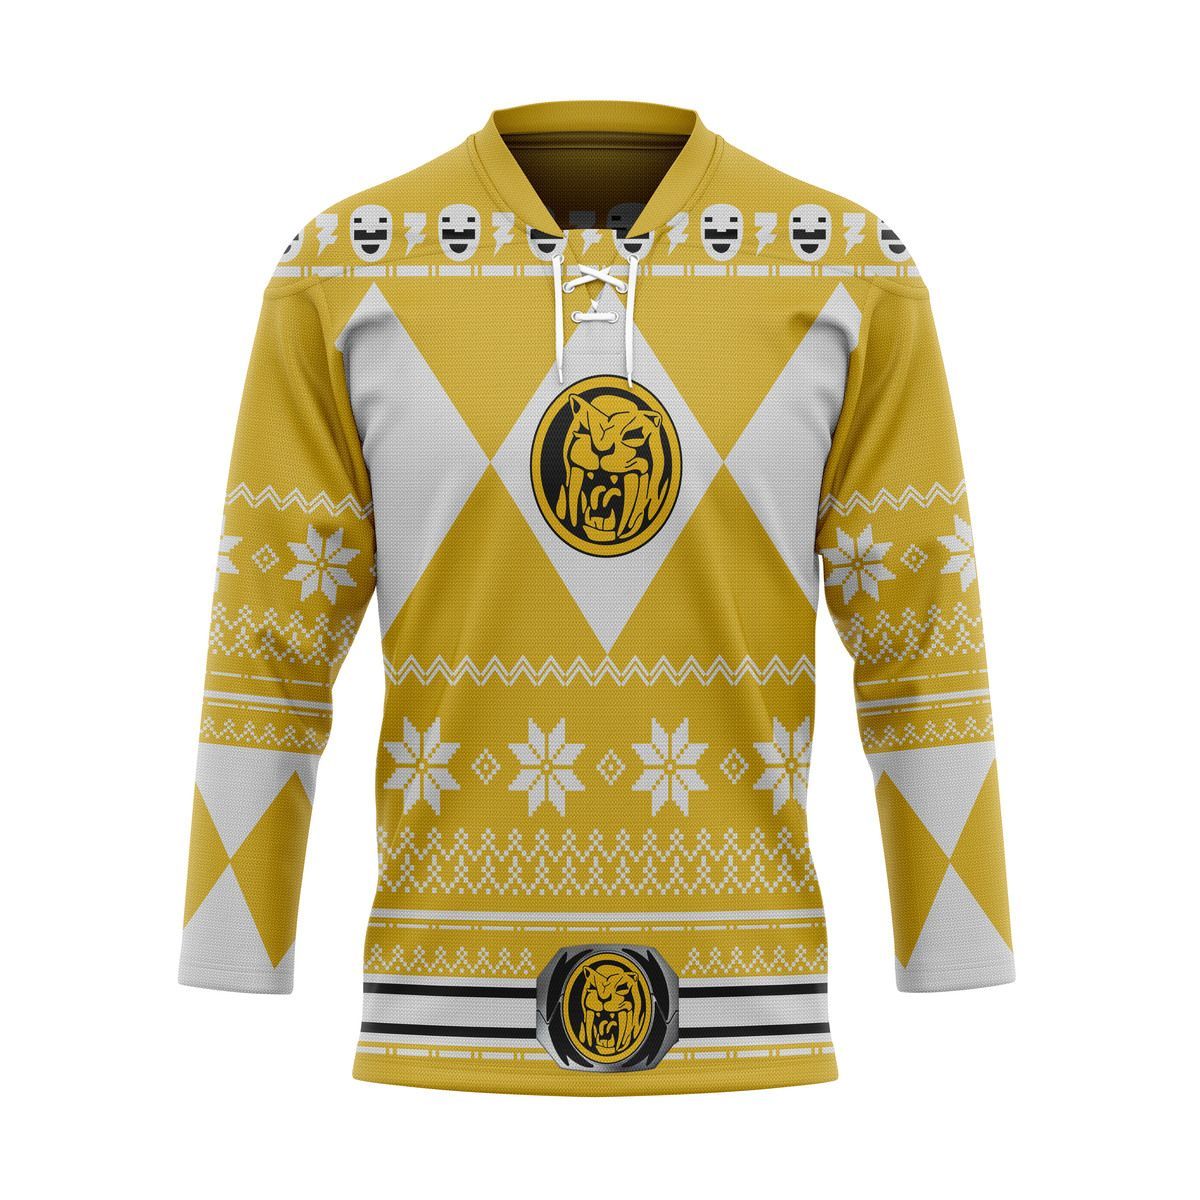 Top cool Hockey jersey for fan You can buy online. 53